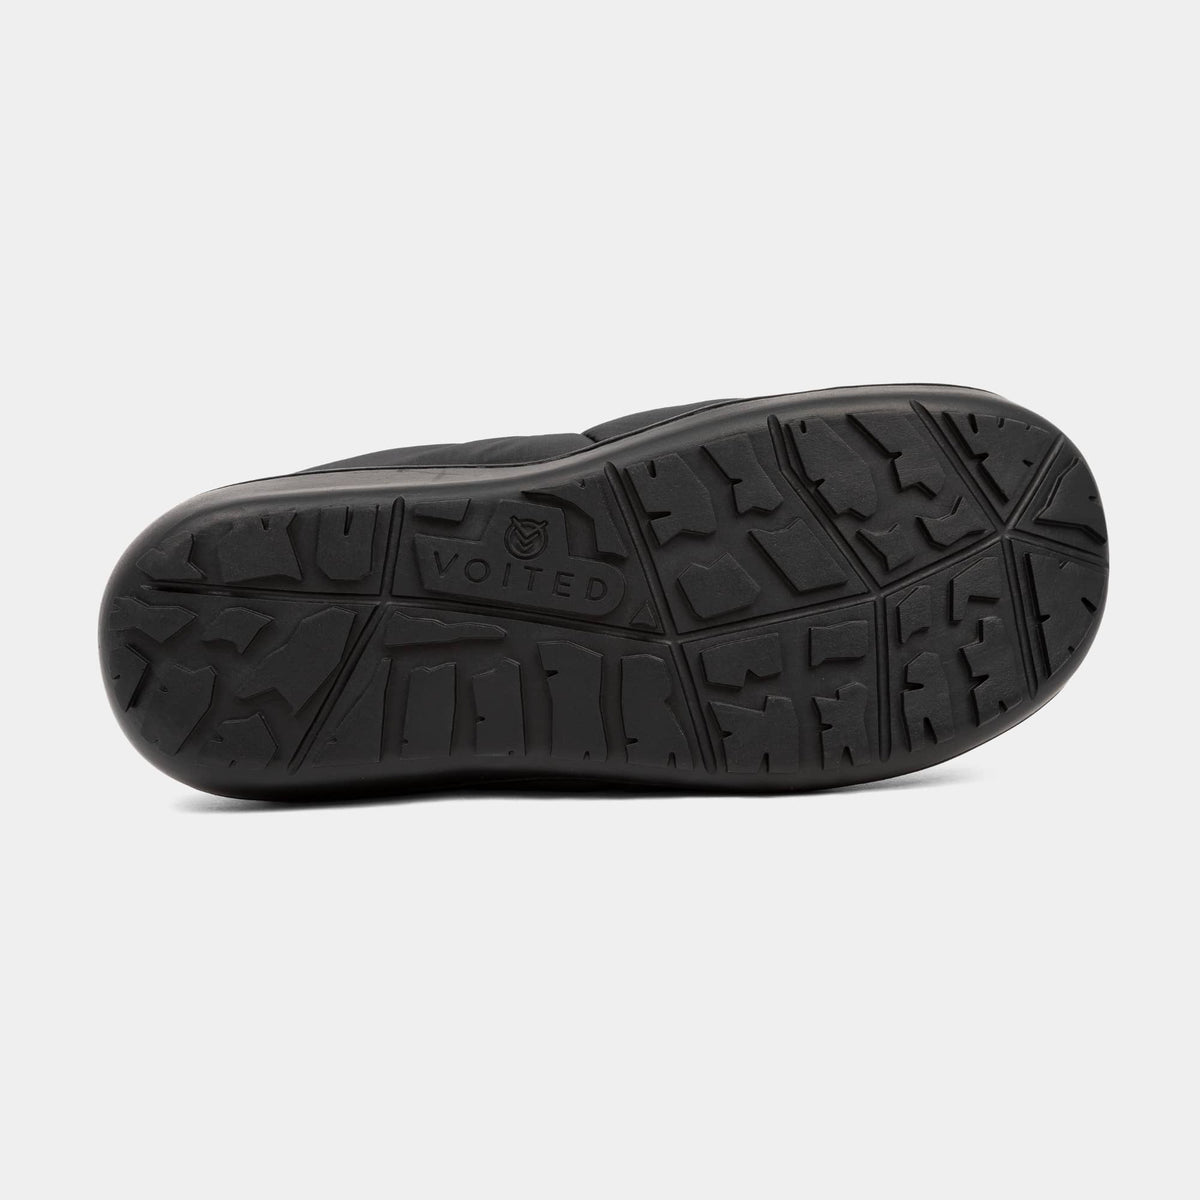 VOITED CloudTouch® Slippers - Lightweight, Indoor/Outdoor Fleece-Lined Camping Slippers - Graphite Footwear VOITED 